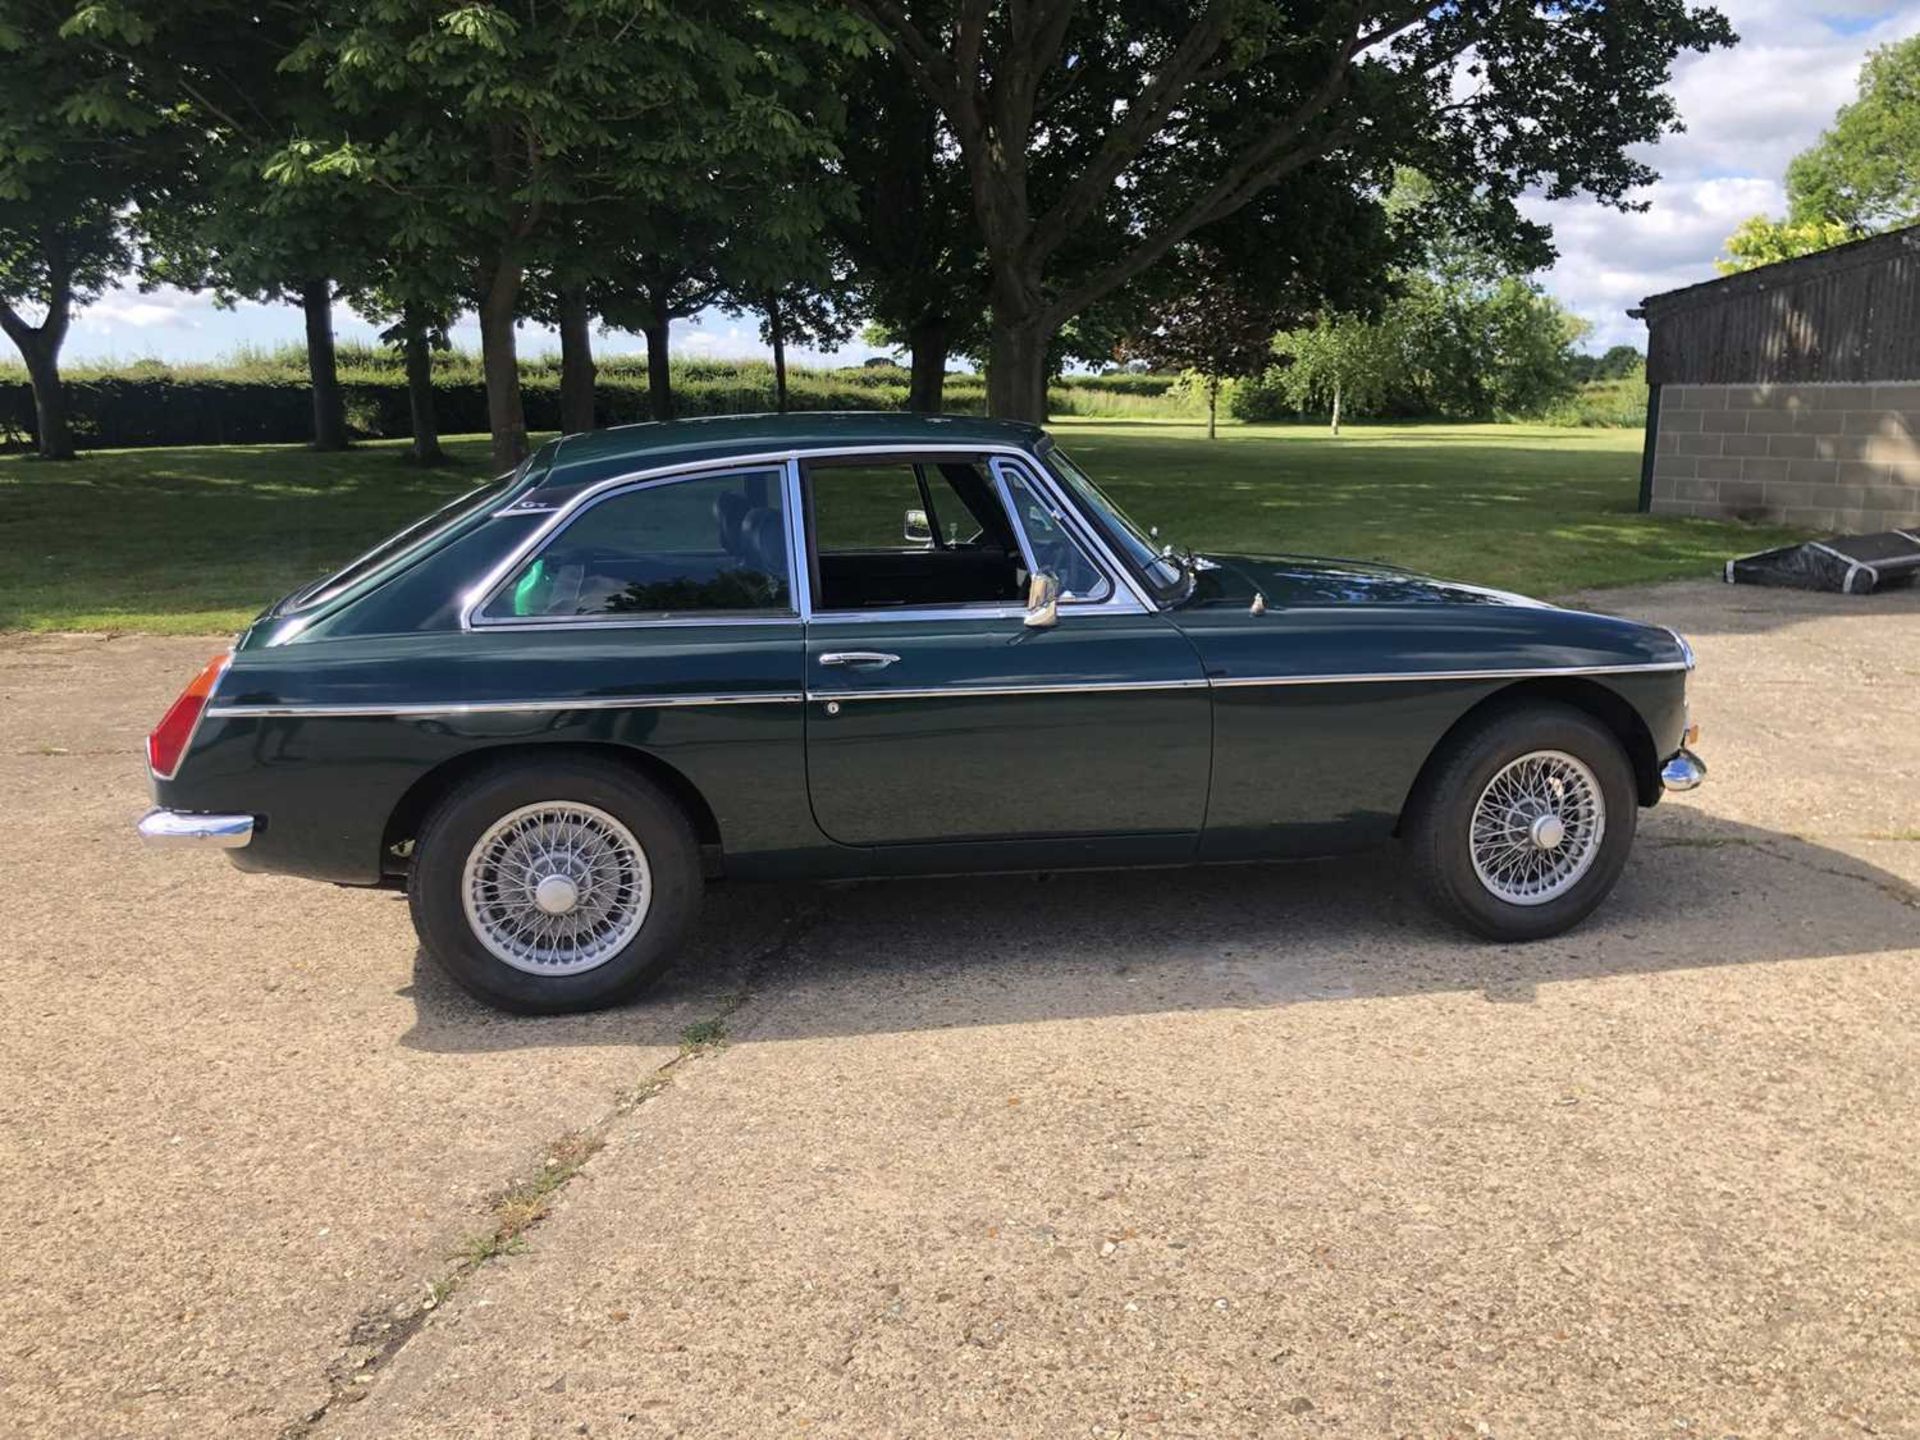 1978 MGB GT, 1.8 petrol, manual, chassis number GHD5-476466G, reg. no. ARY 770T - Image 5 of 23